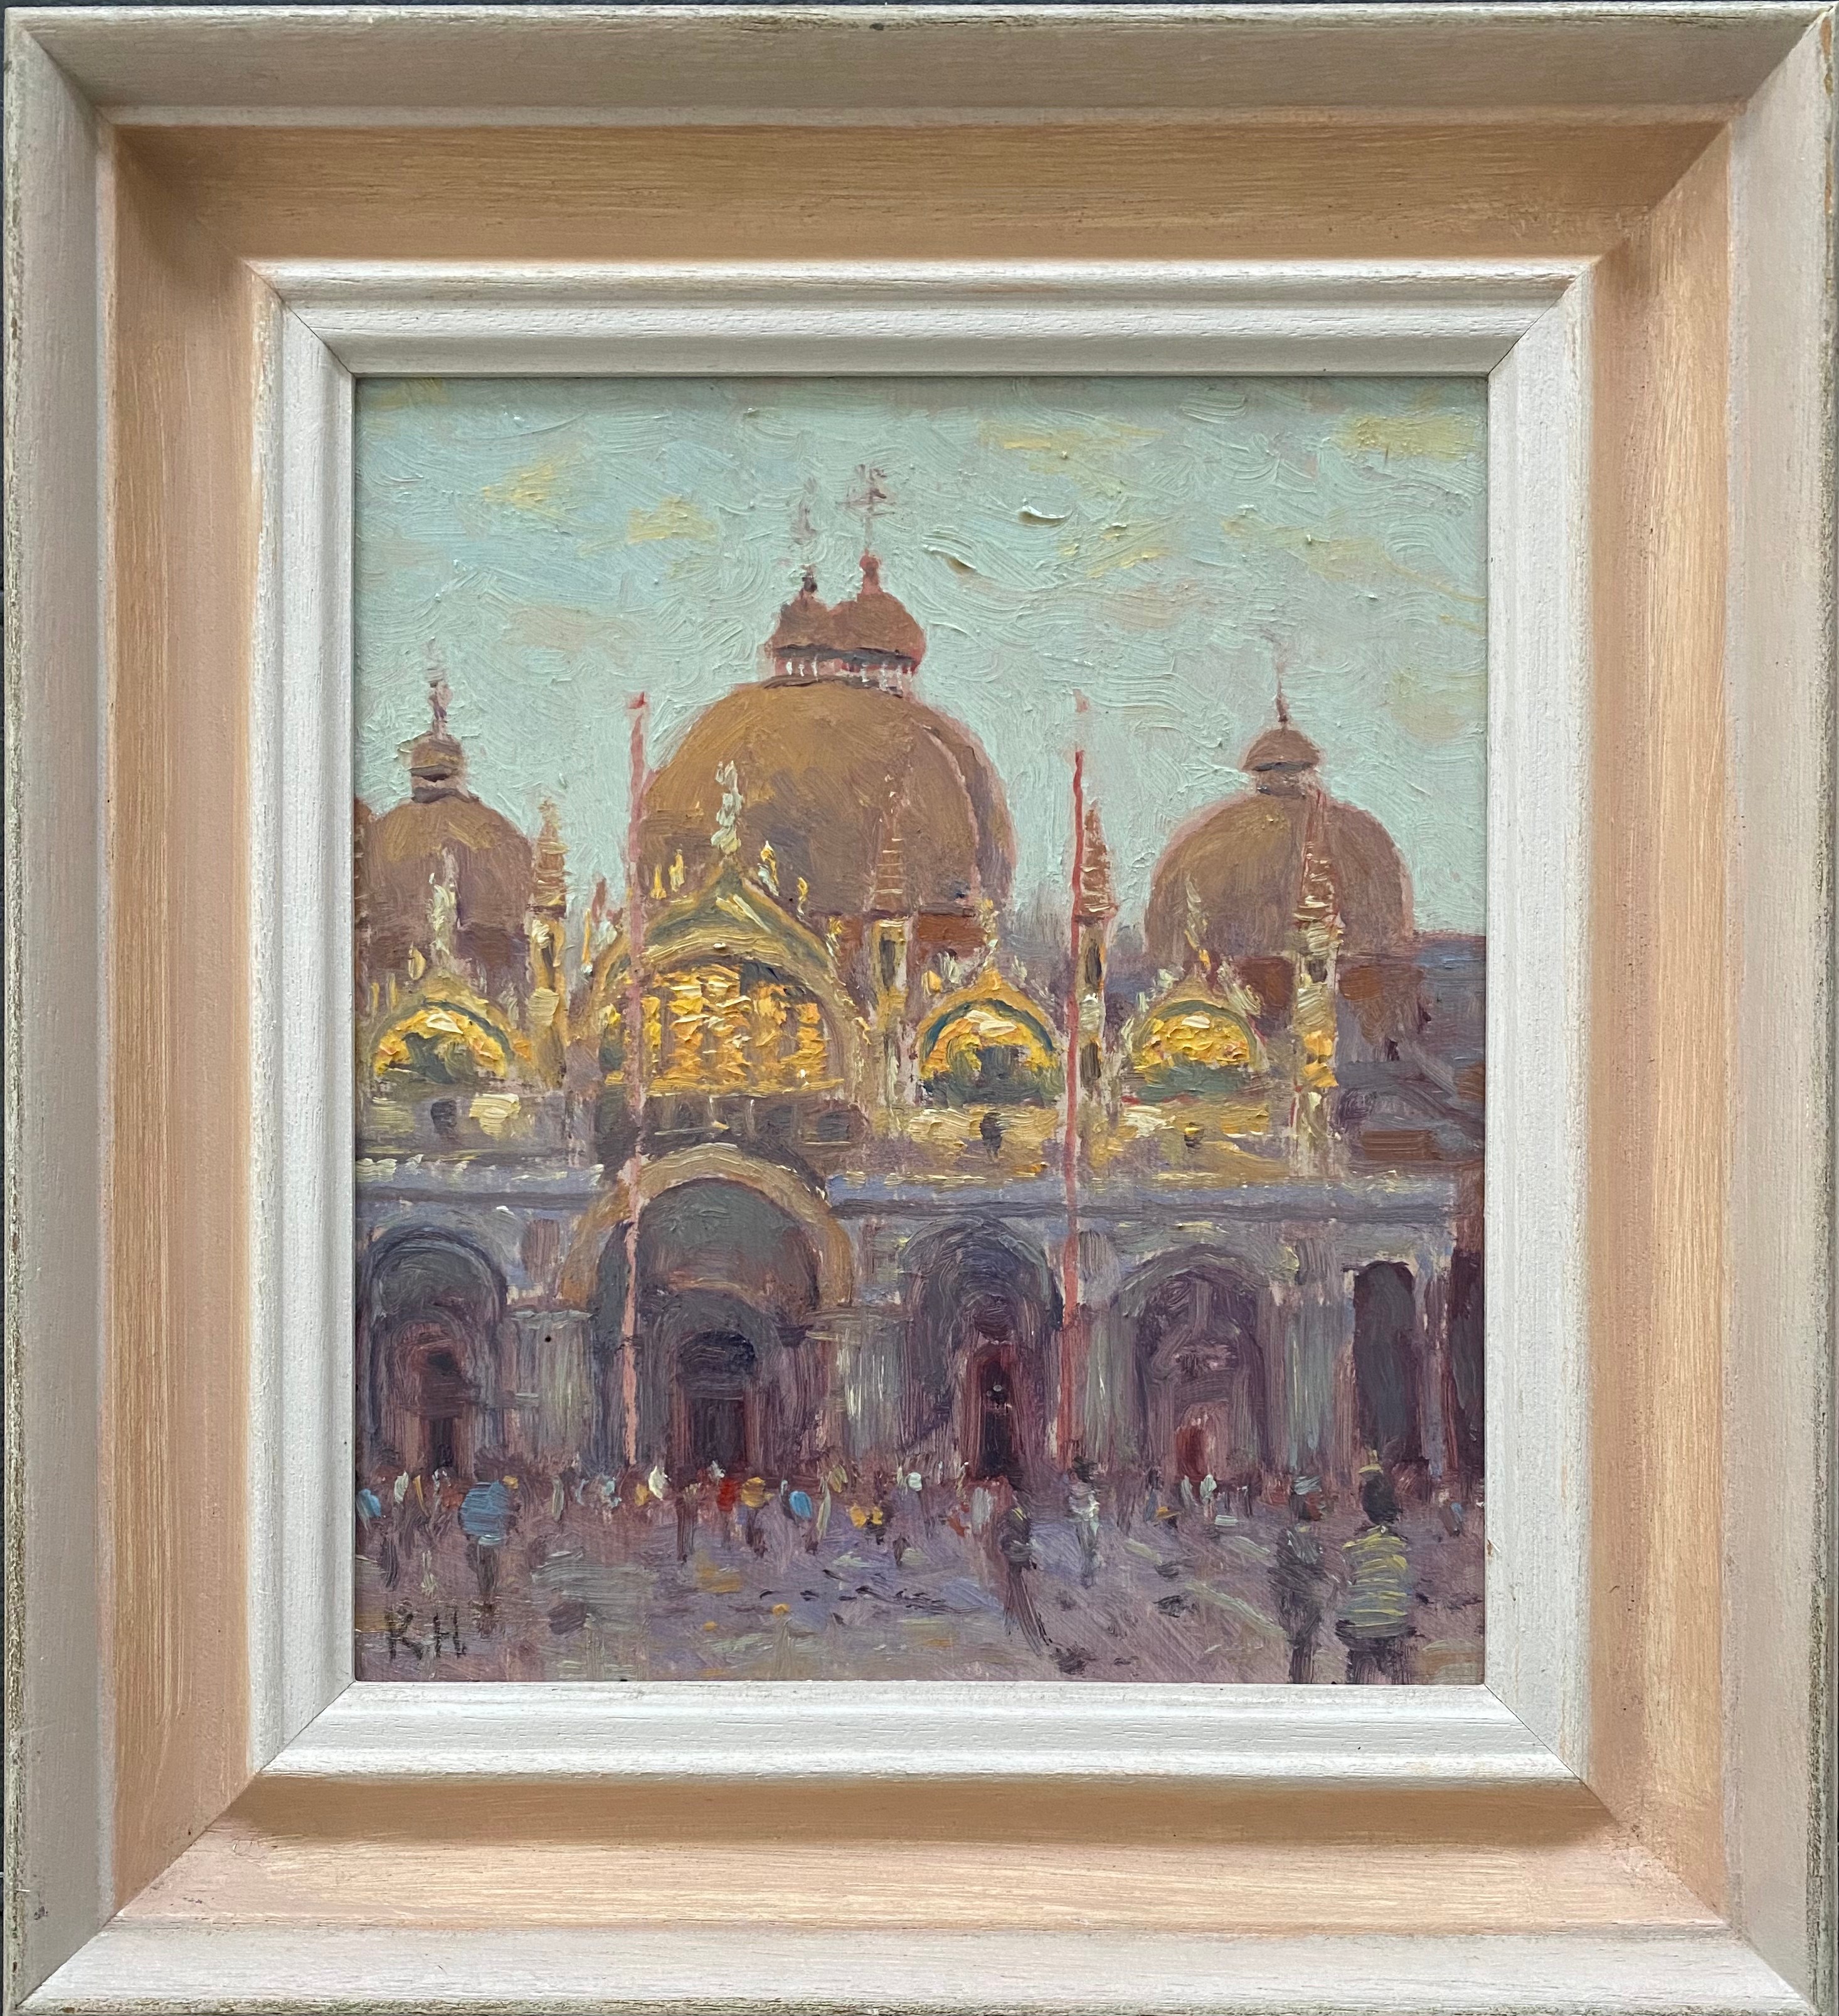 Ken Howard b1932 (Attributed to). British. Oil on canvas. “San Marco Venice”. Signed with initials